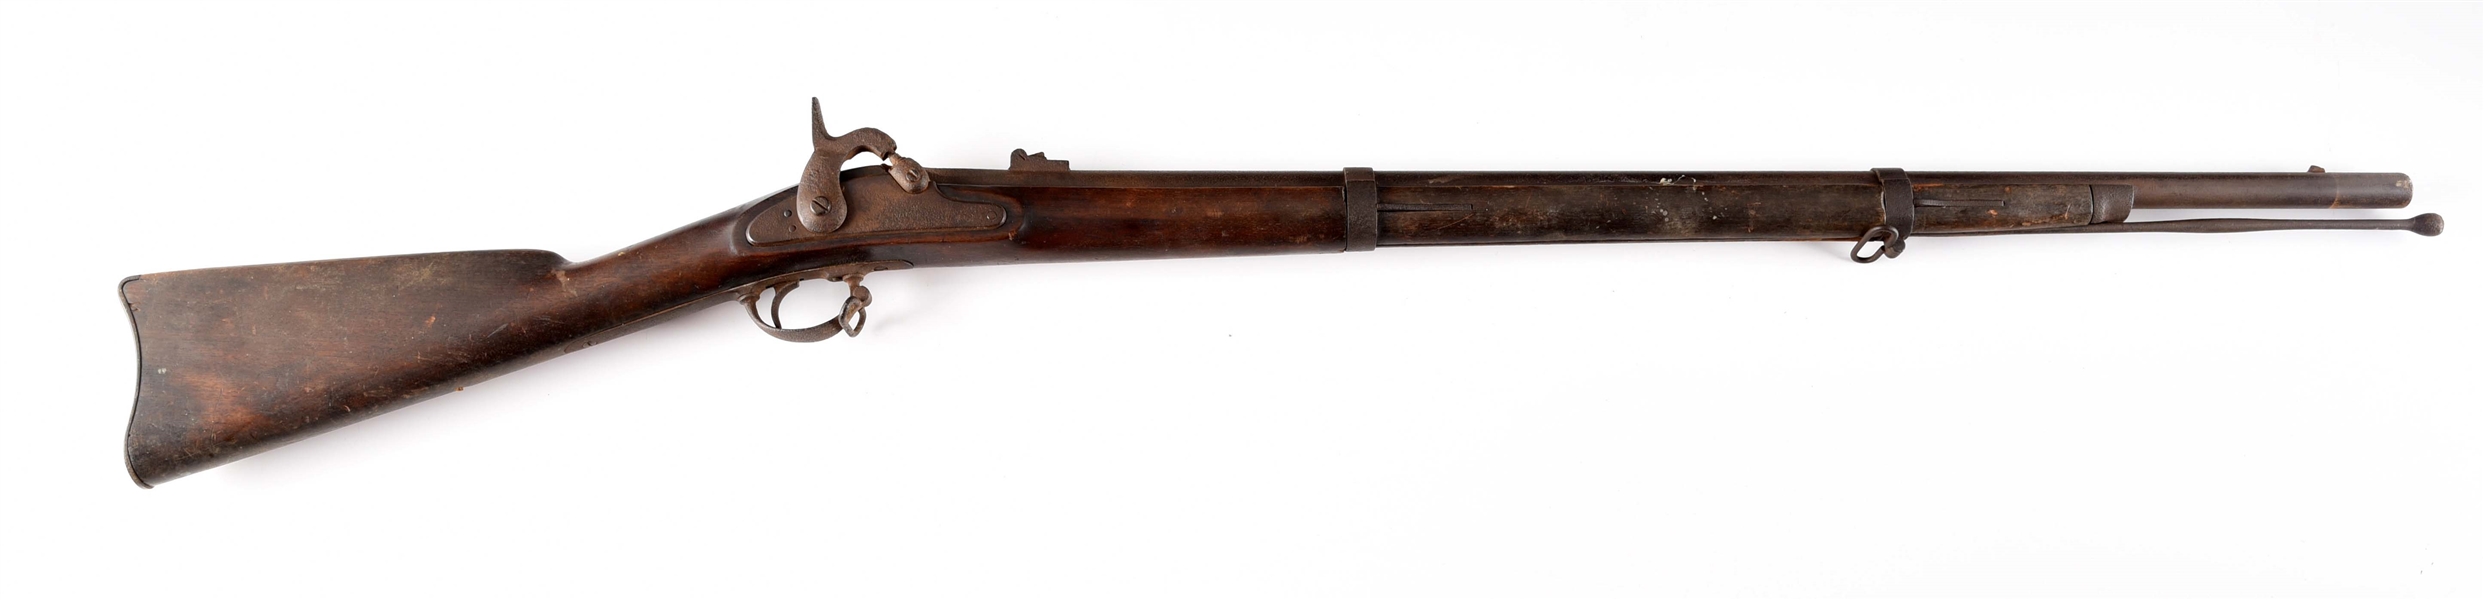 (A) NEW JERSEY MARKED US M1861 RIFLED MUSKET.